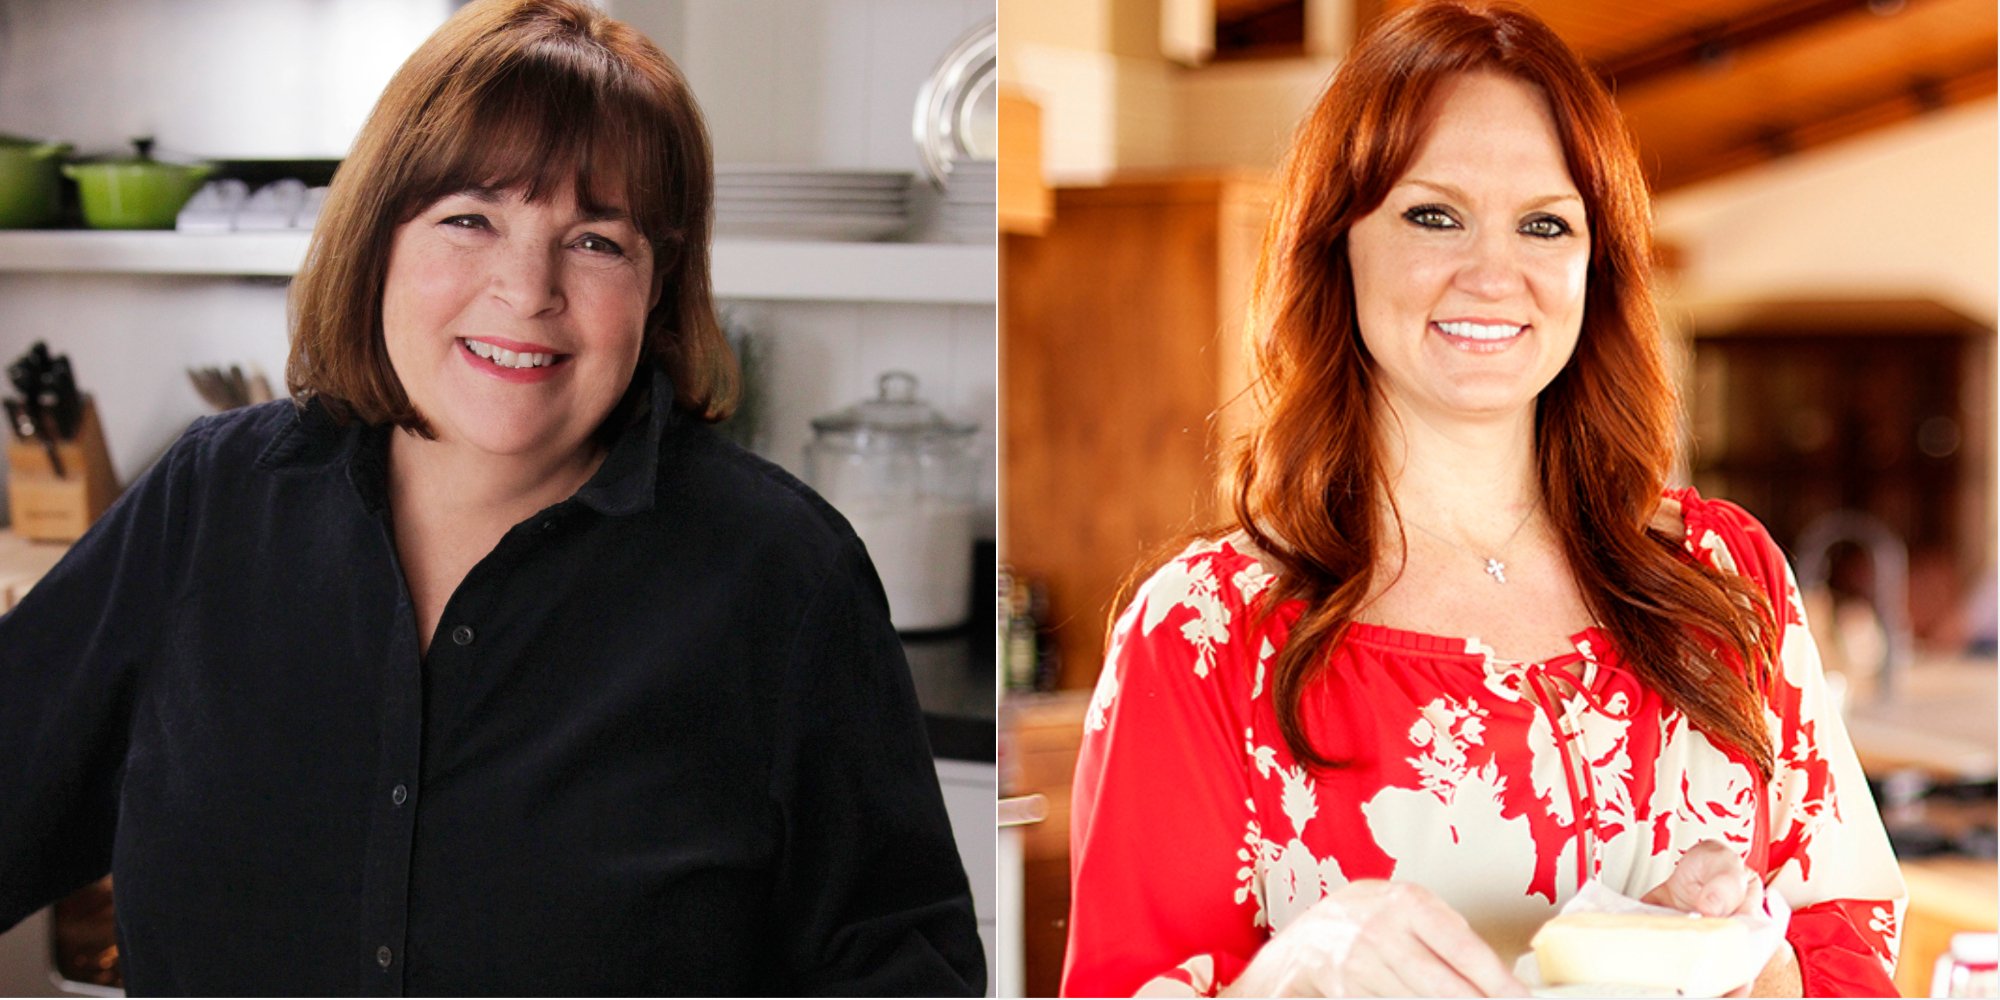 Ina Garten and Ree Drummond stand in side by side photographs on the set of their respective Food Network cooking shows.